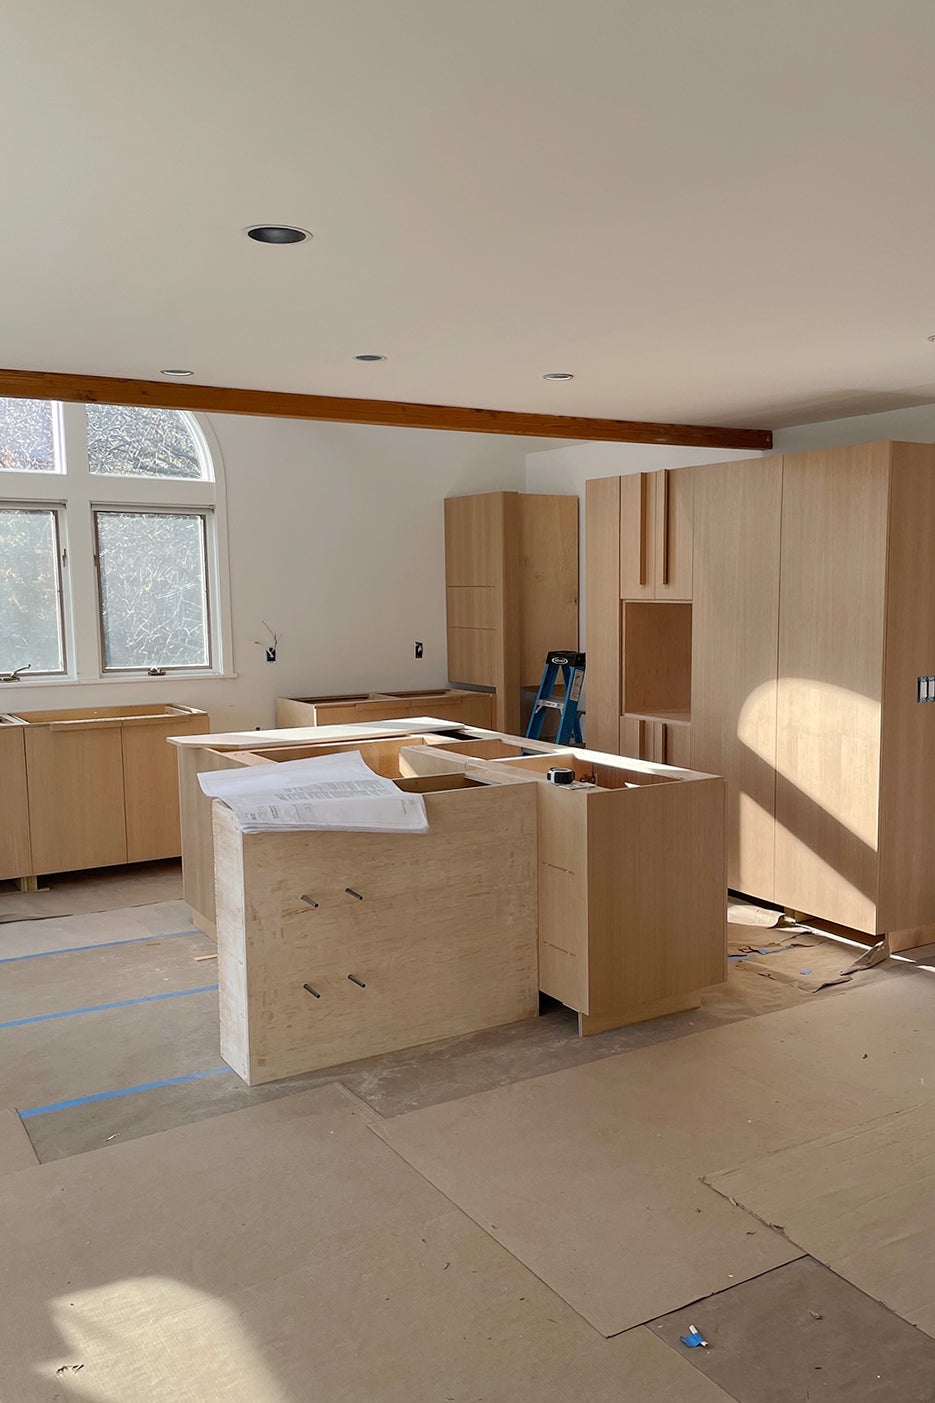 cabinets being installed